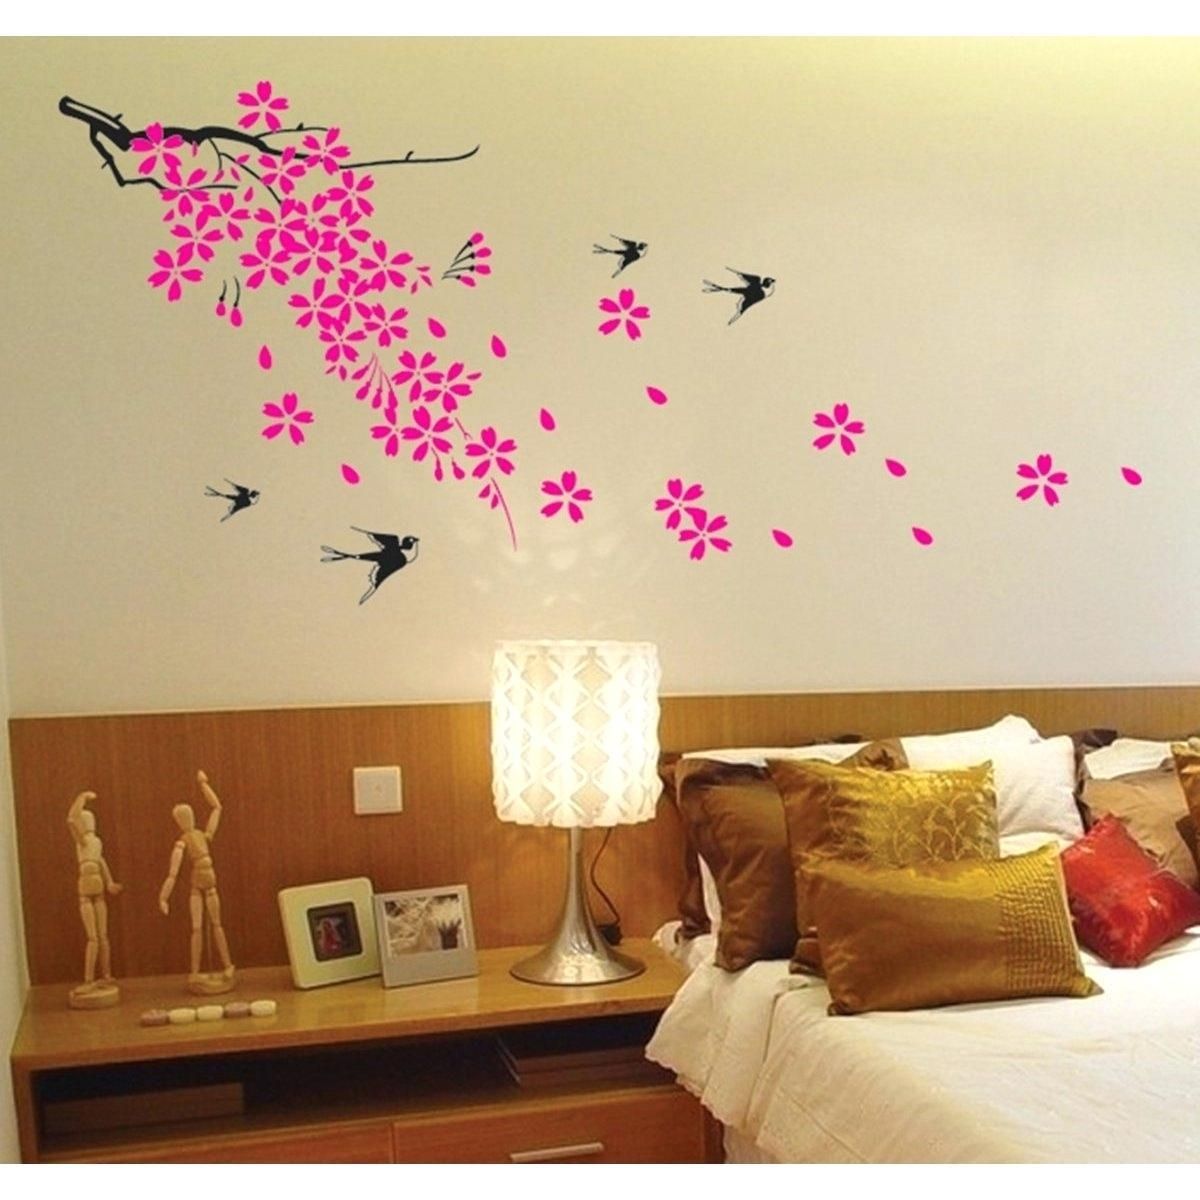 Wall Ideas: Girly Wall Art. Girly Wall Art Ideas (View 2 of 20)